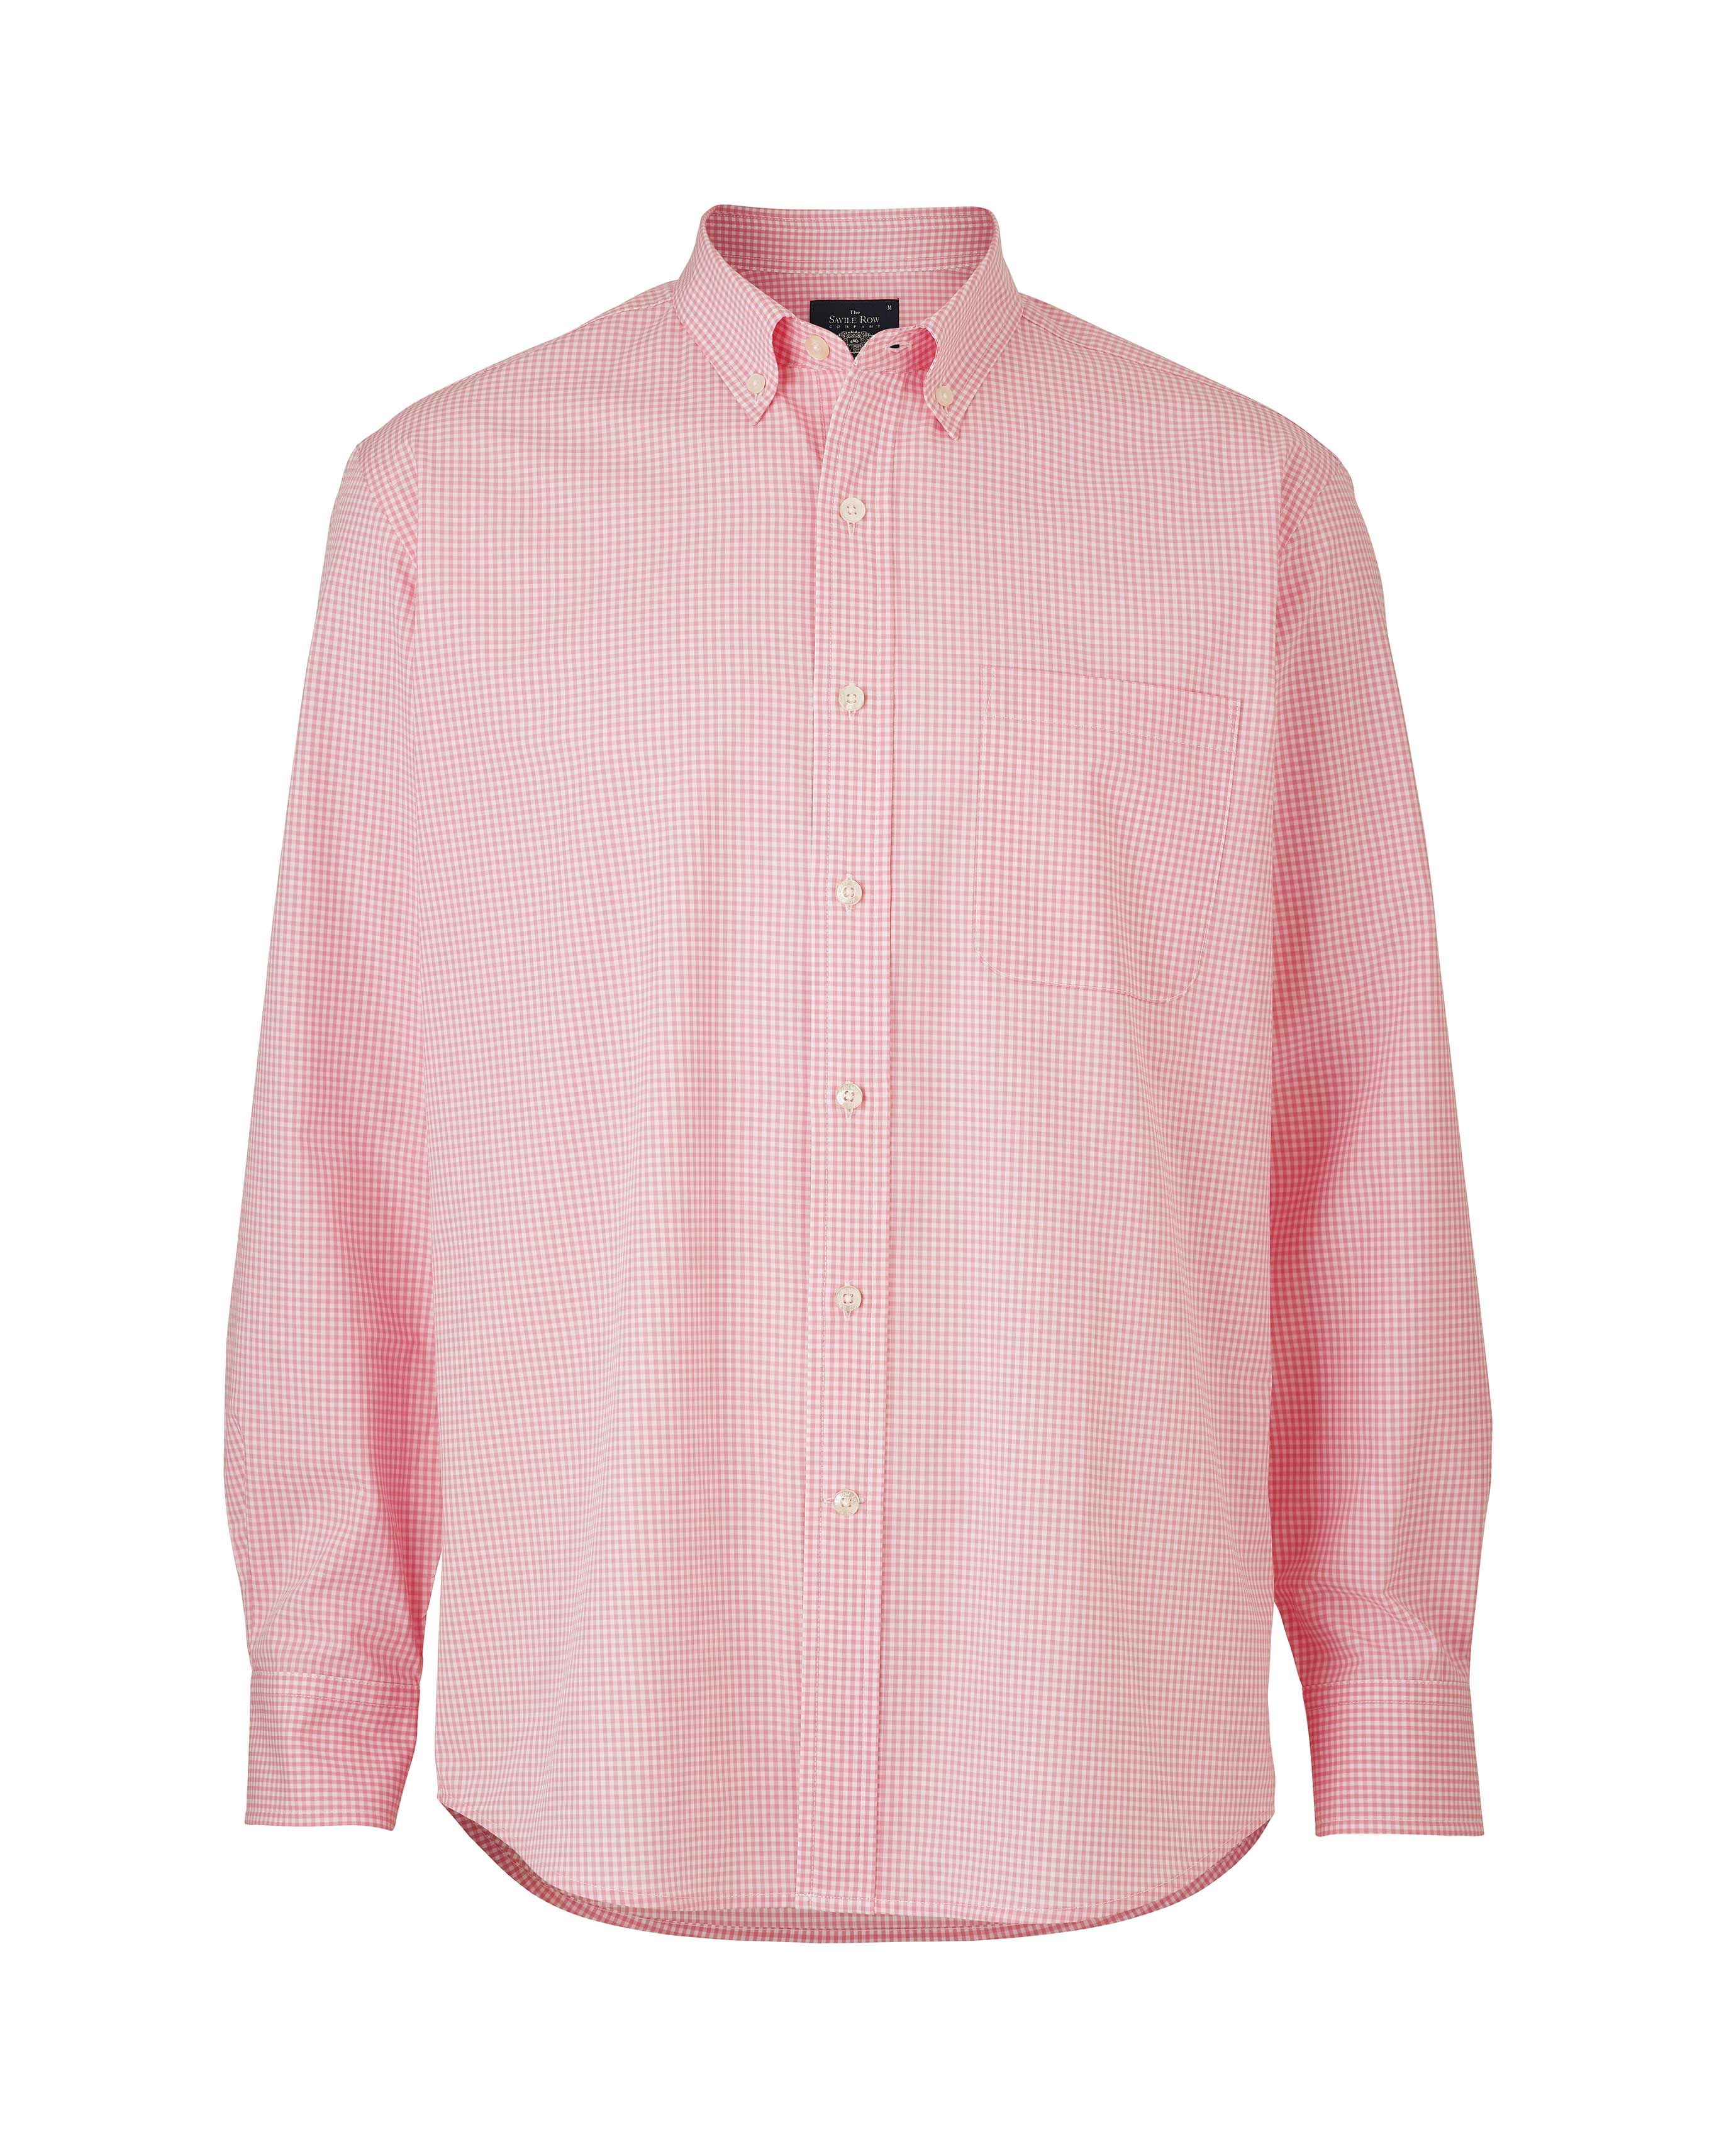 Men’s Pink Gingham Check Classic Fit Shirt | Savile Row Co